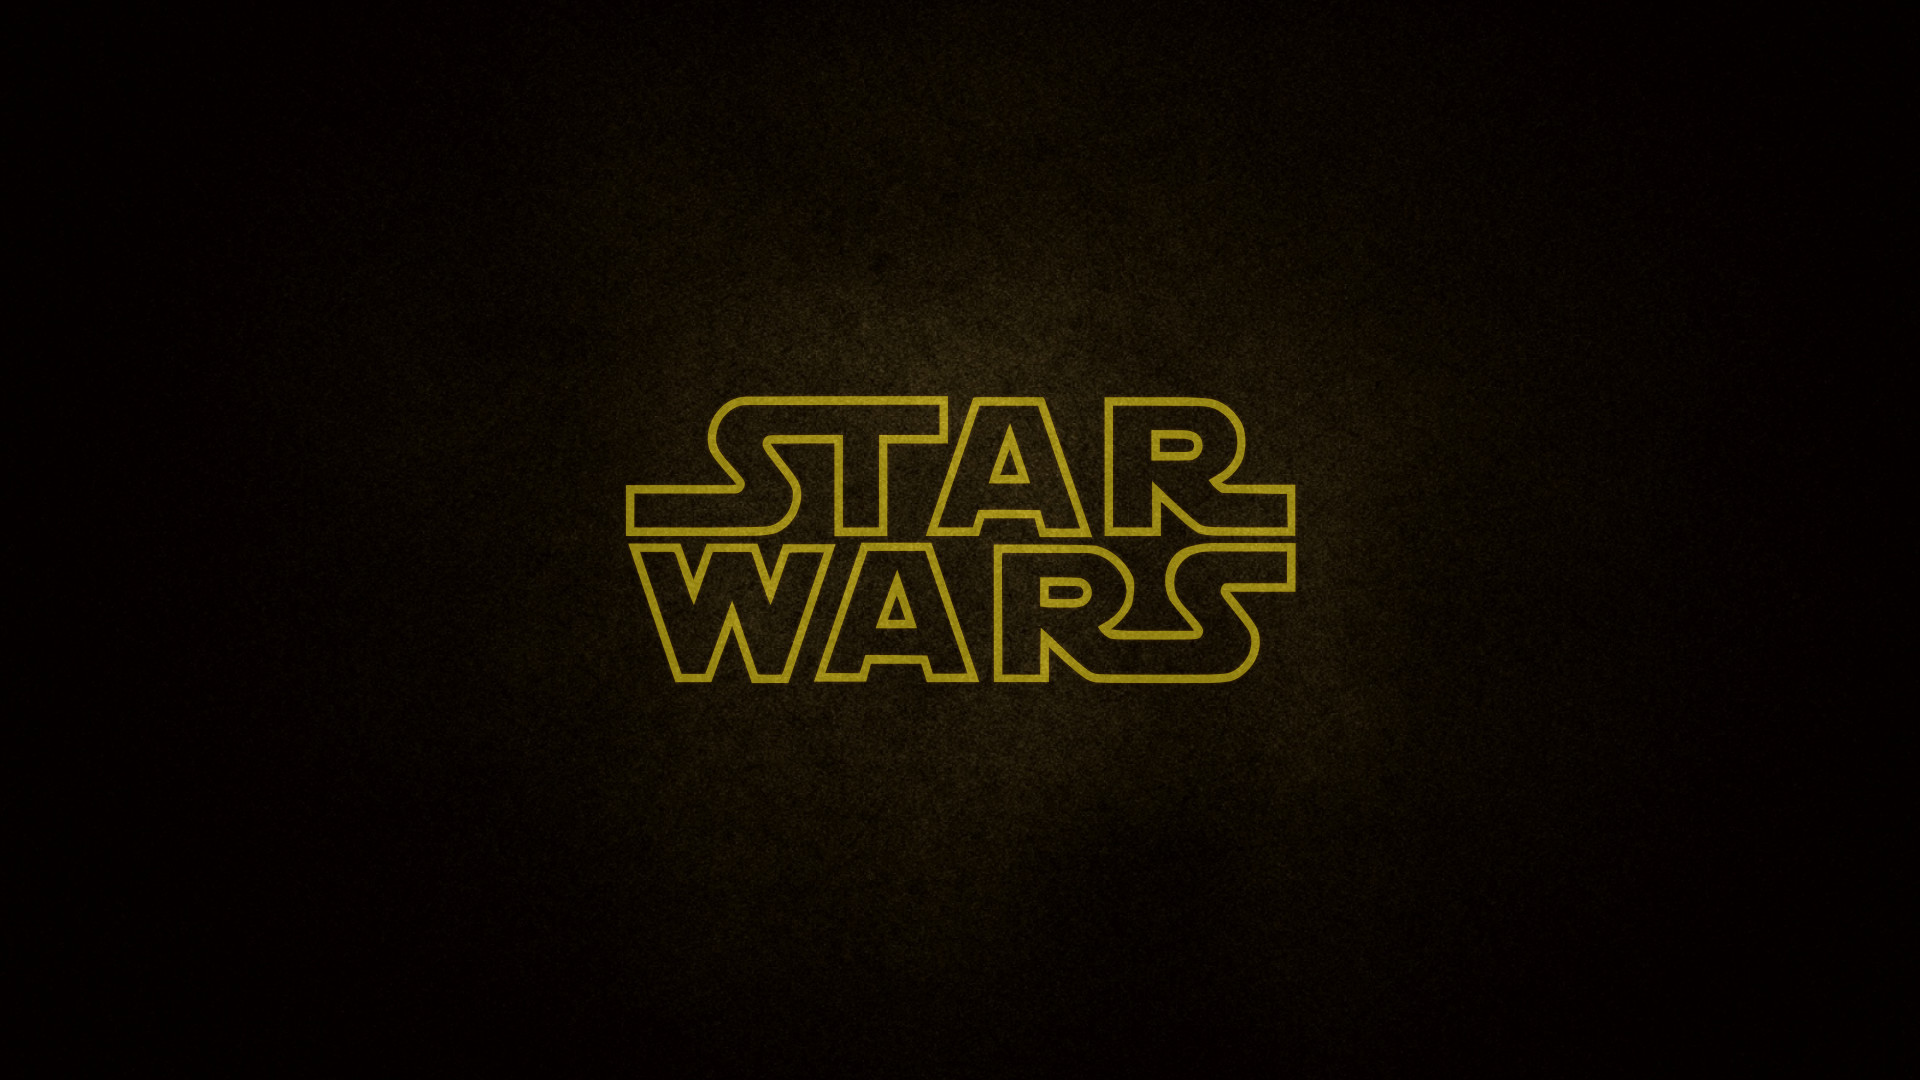 1920x1080 564 Star Wars HD Wallpapers | Backgrounds - Wallpaper Abyss